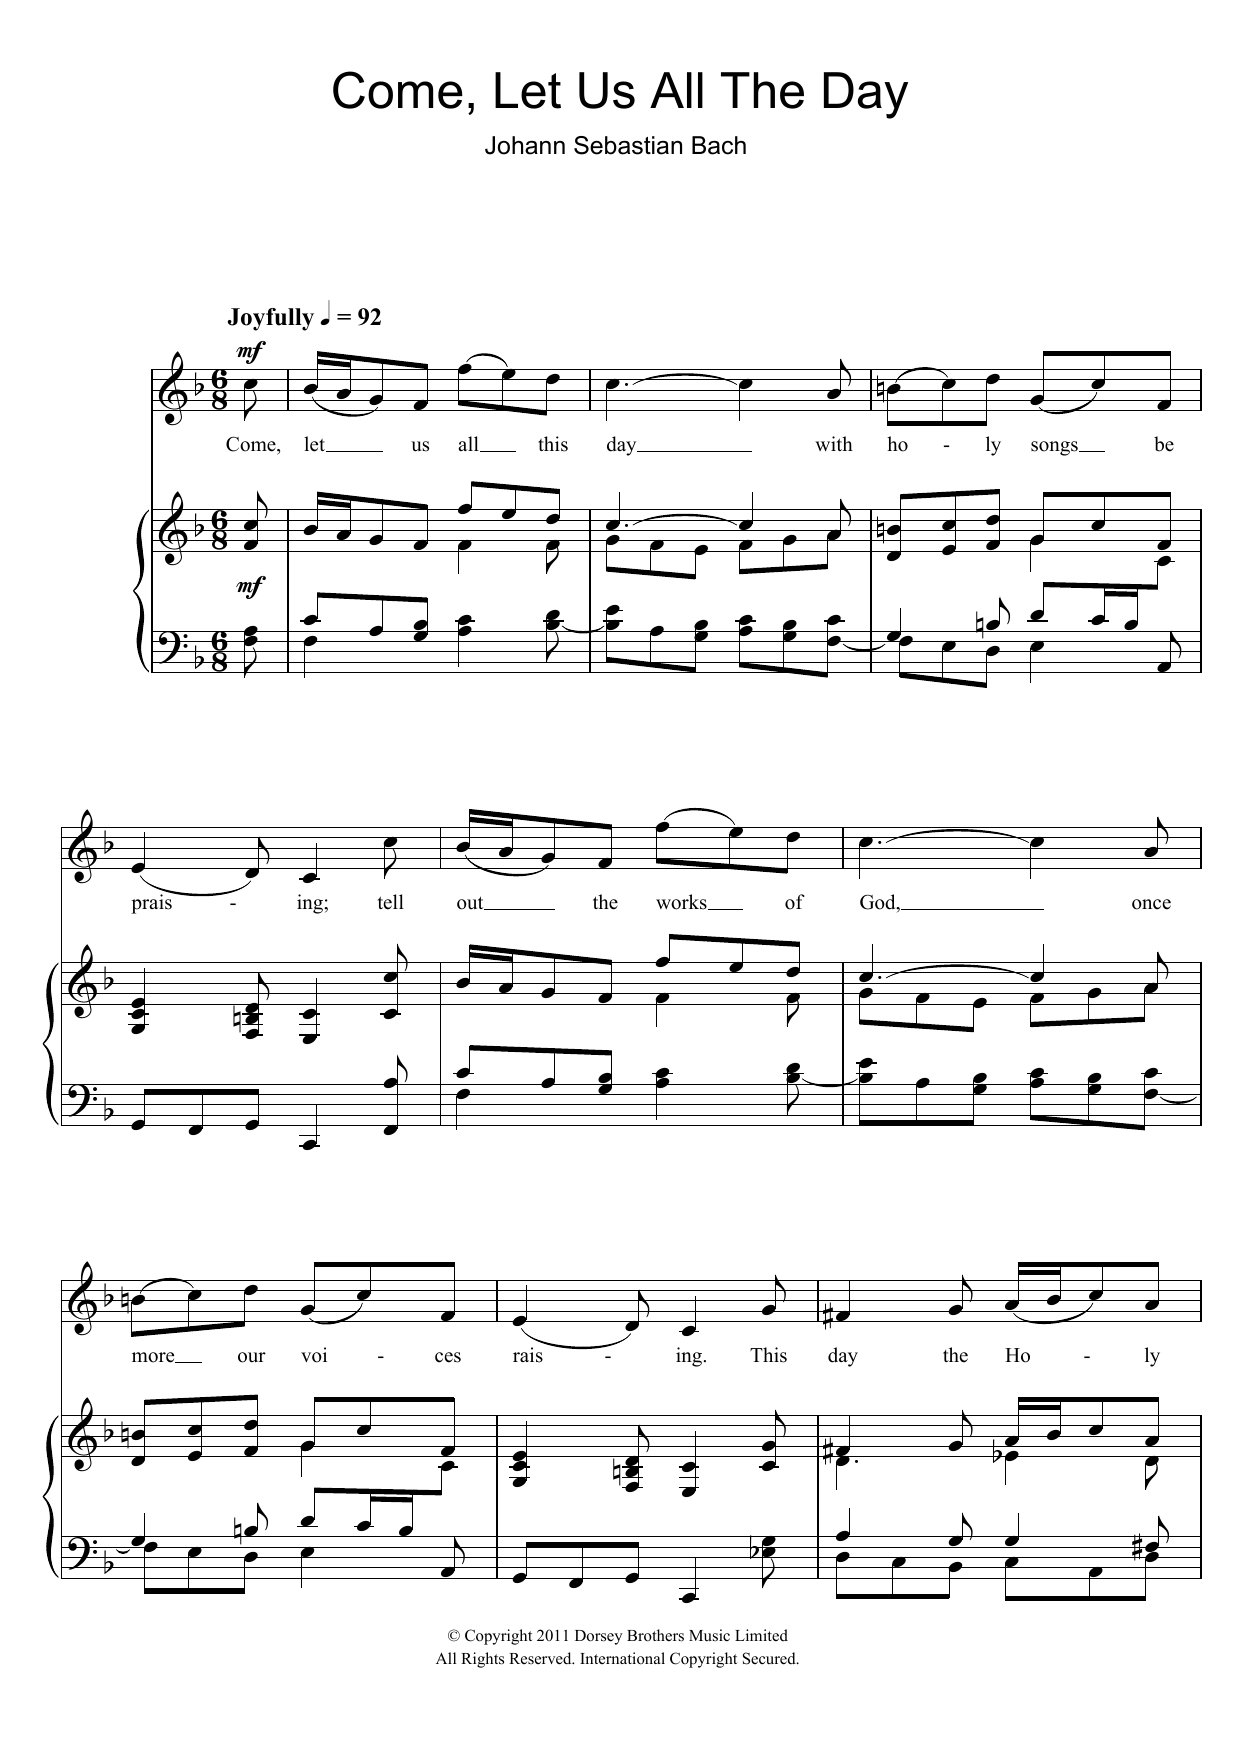 Download Johann Sebastian Bach Come, Let Us All The Day Sheet Music